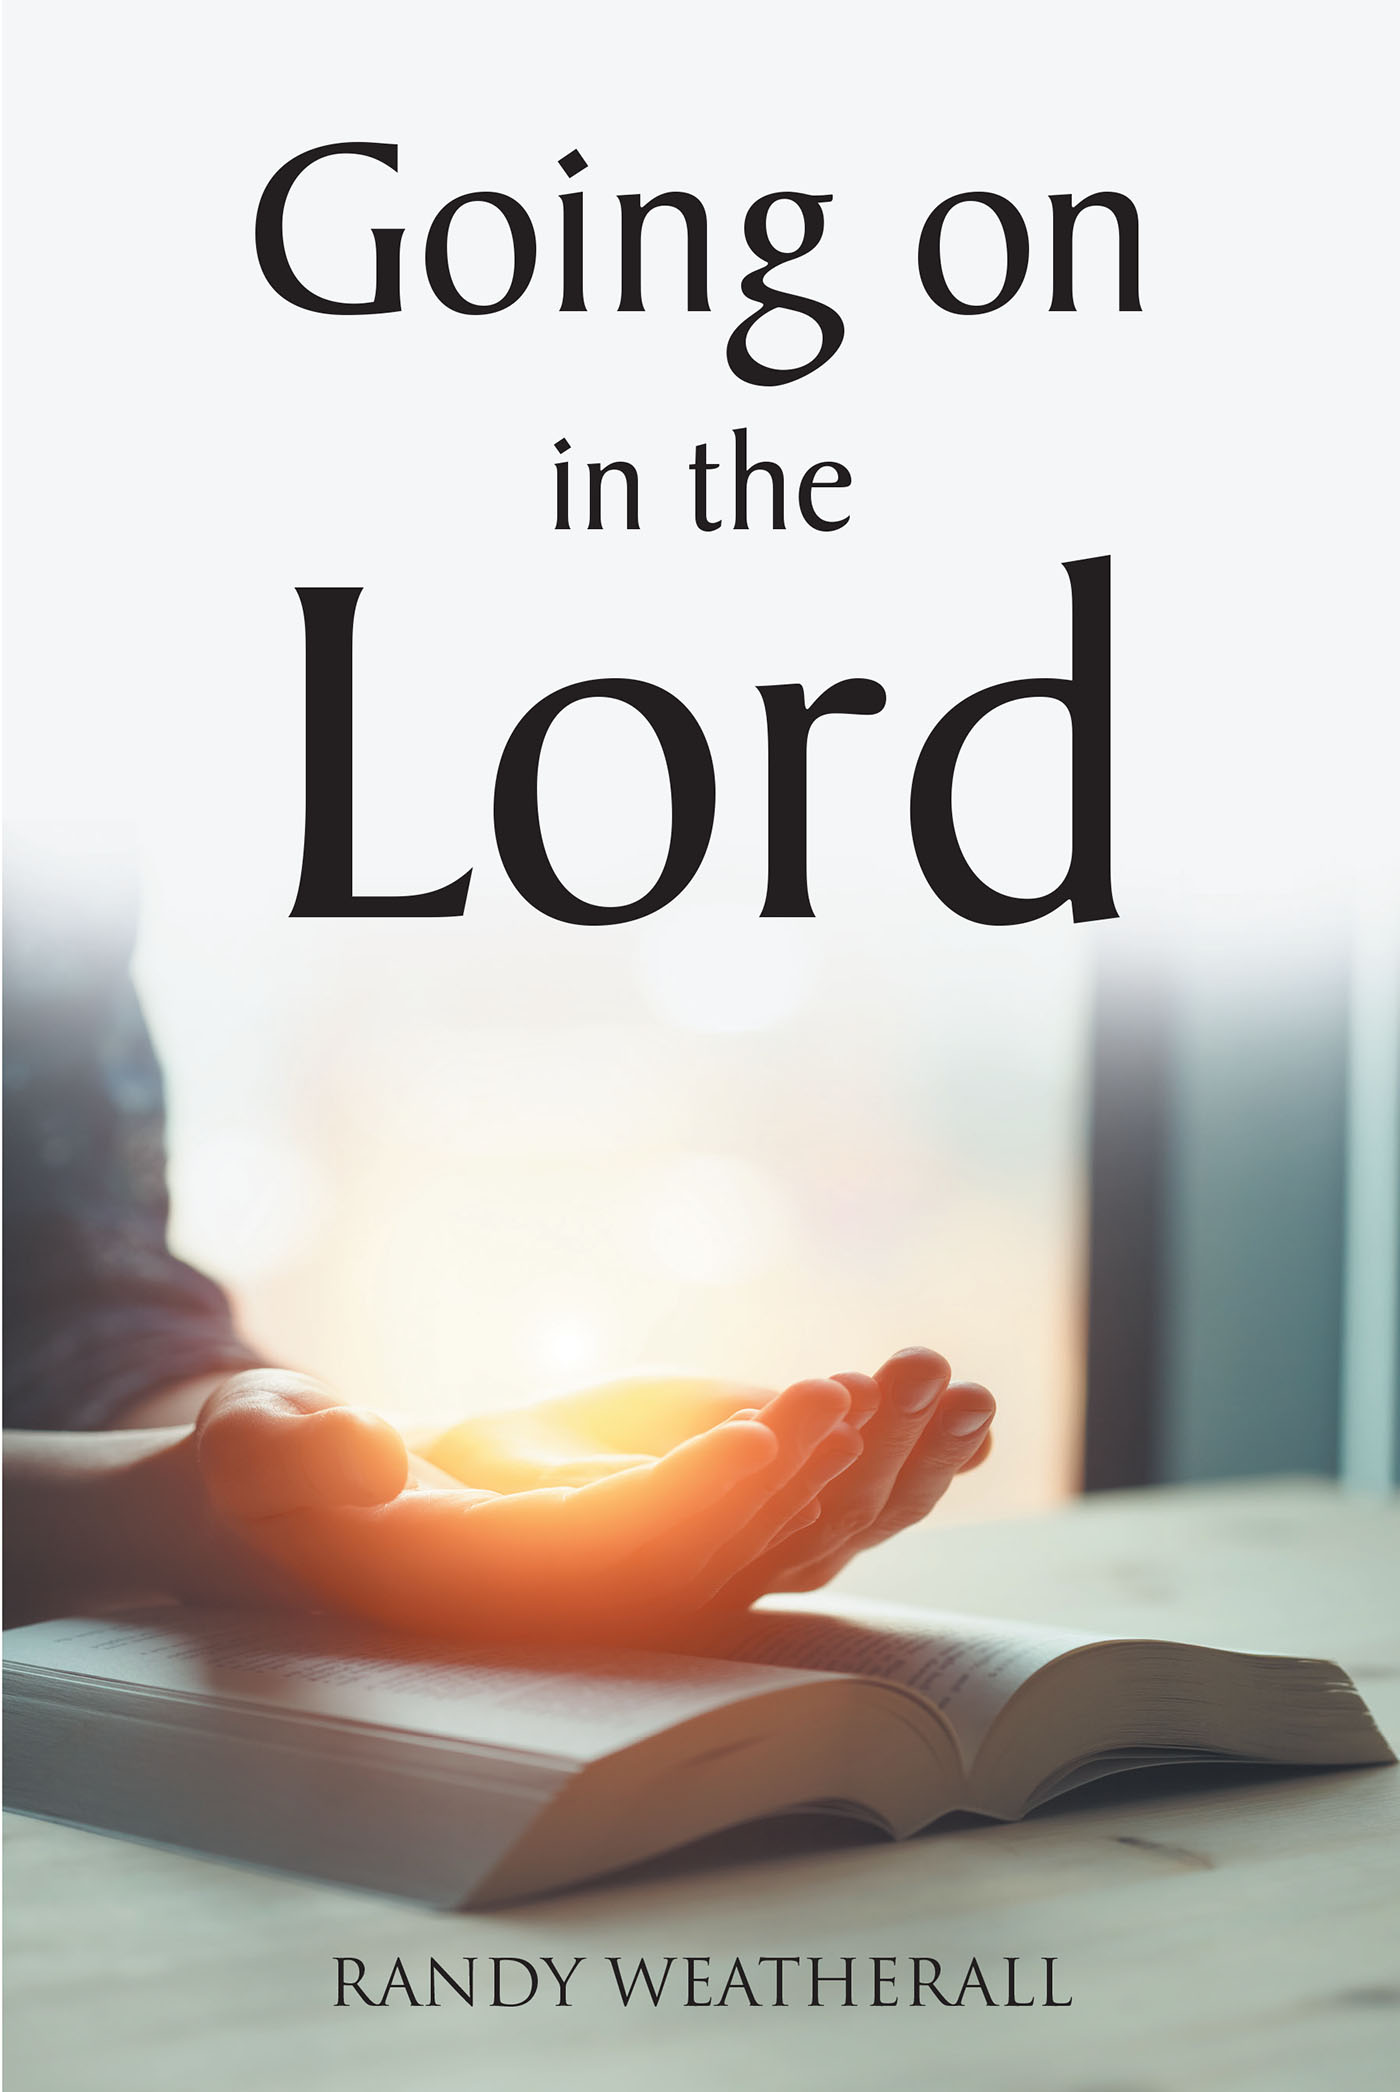 Randy Weatherall’s Newly Released "Going on in the Lord" is an Encouraging Message for Anyone Facing a Challenge of Faith